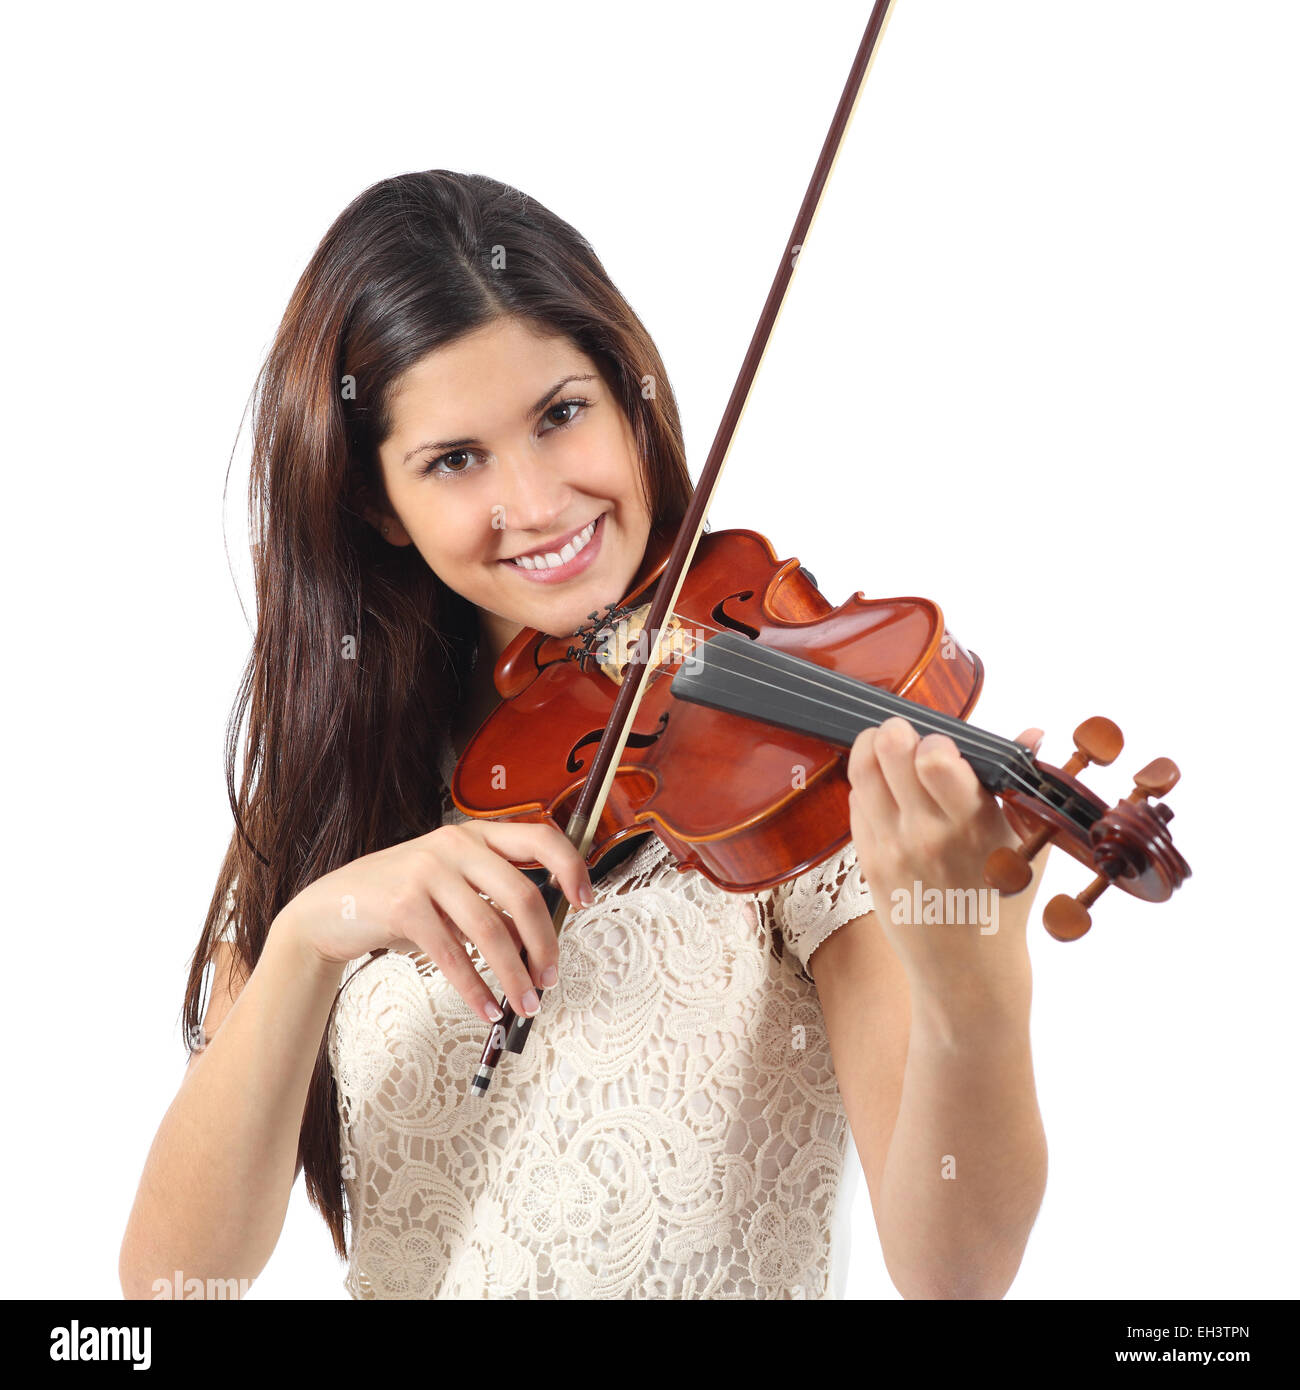 Woman learning to play violin isolated on a white background Stock Photo